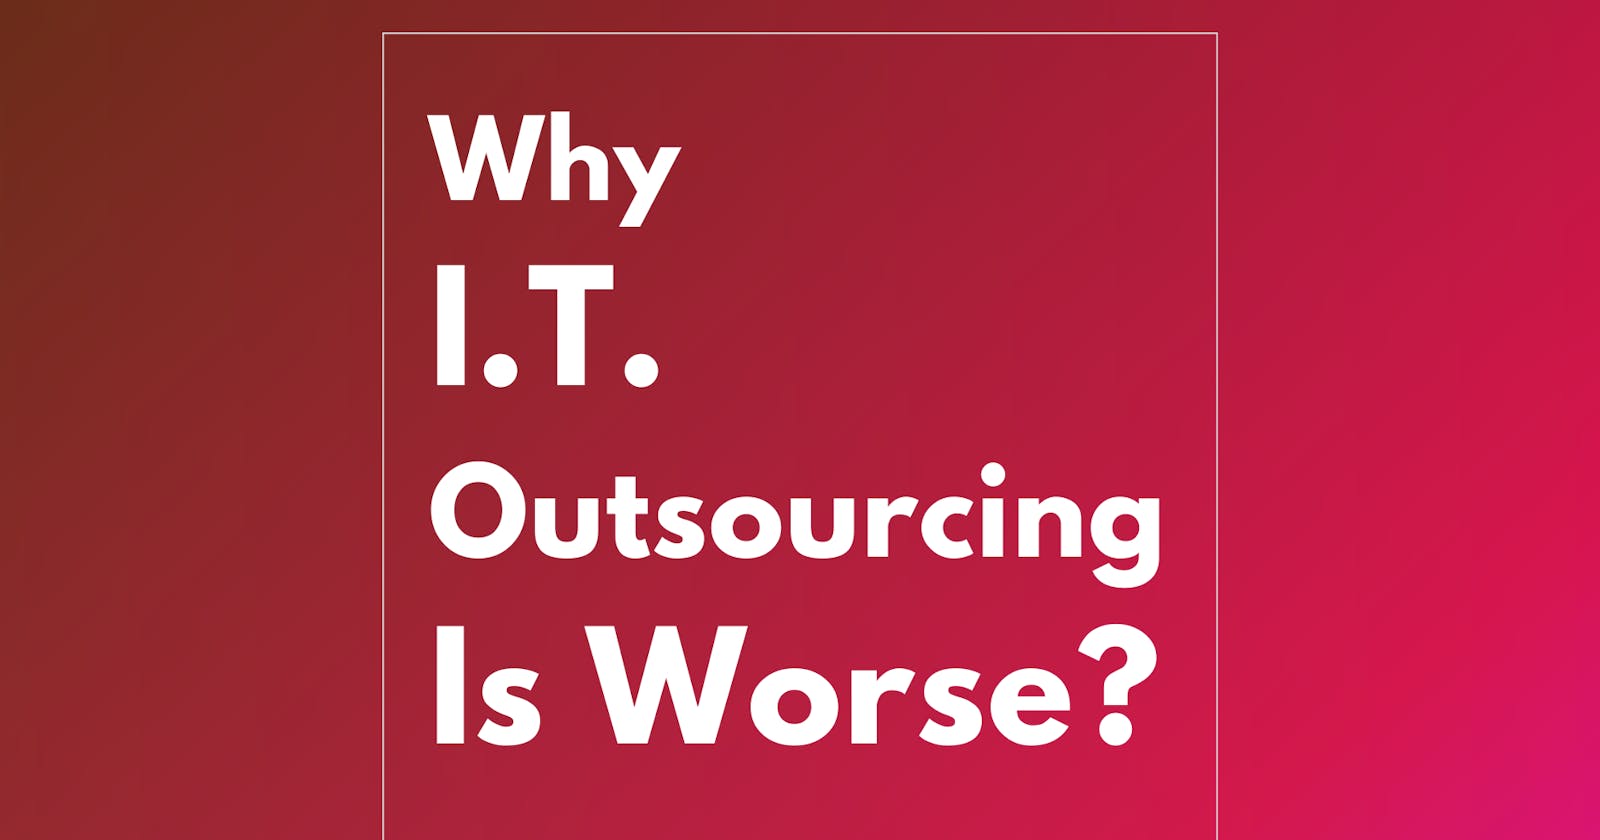 Why I.T. Outsourcing Is Worse? 8 Business Experts’ Opinion ⚡